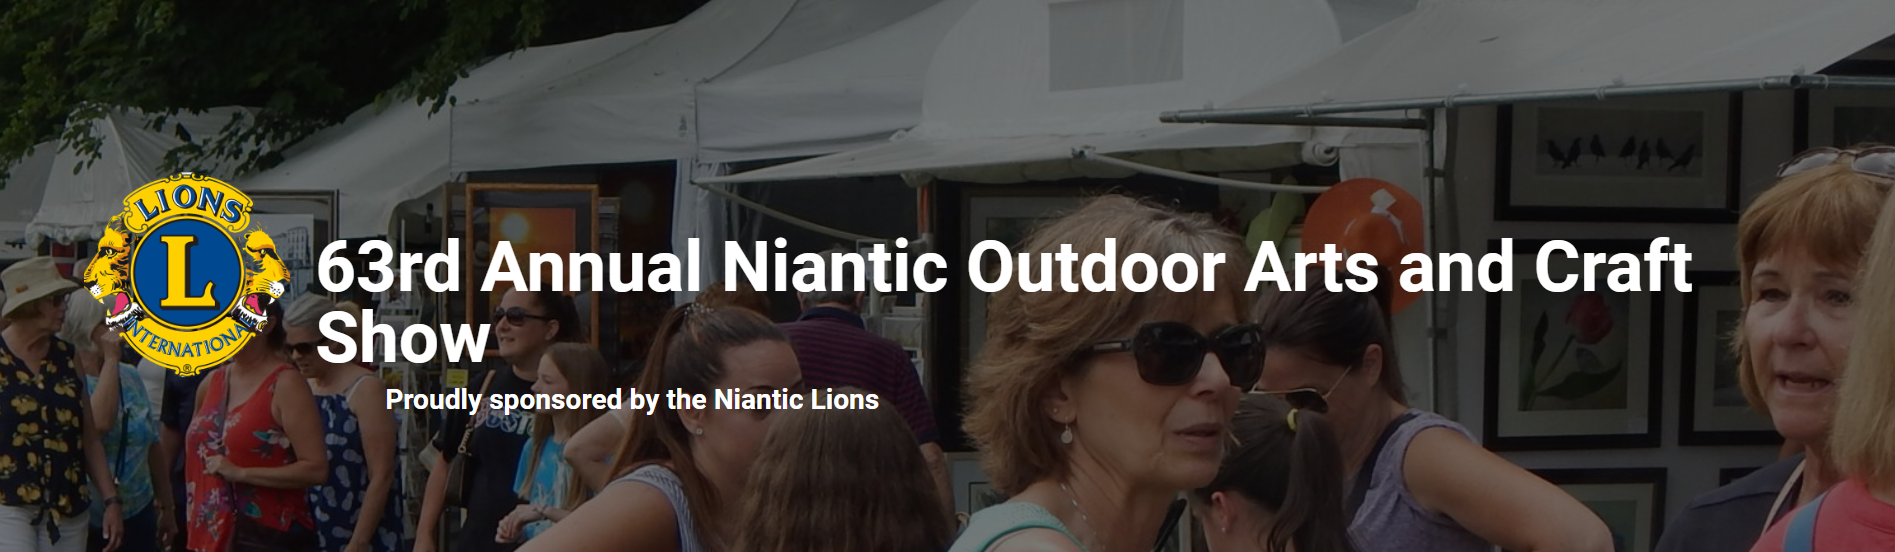 Annual Niantic Outdoor Art & Craft Show